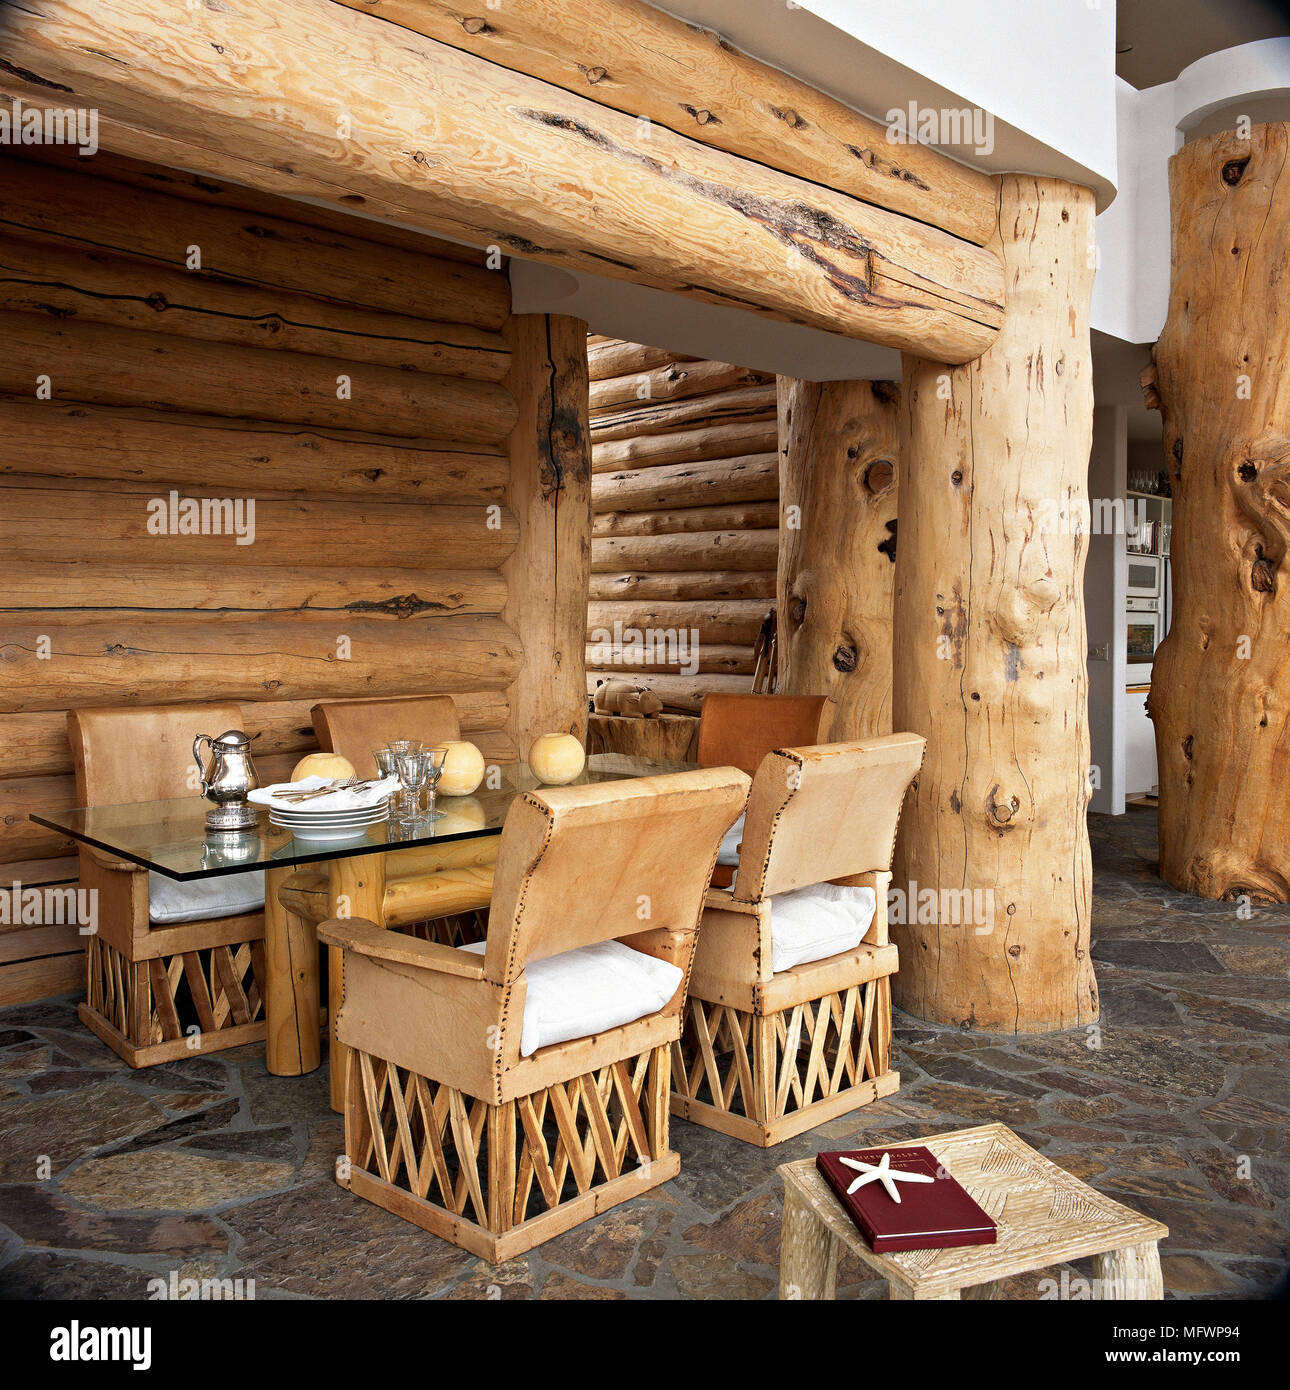 Dining room with timber log walls and stone floor. Stock Photo